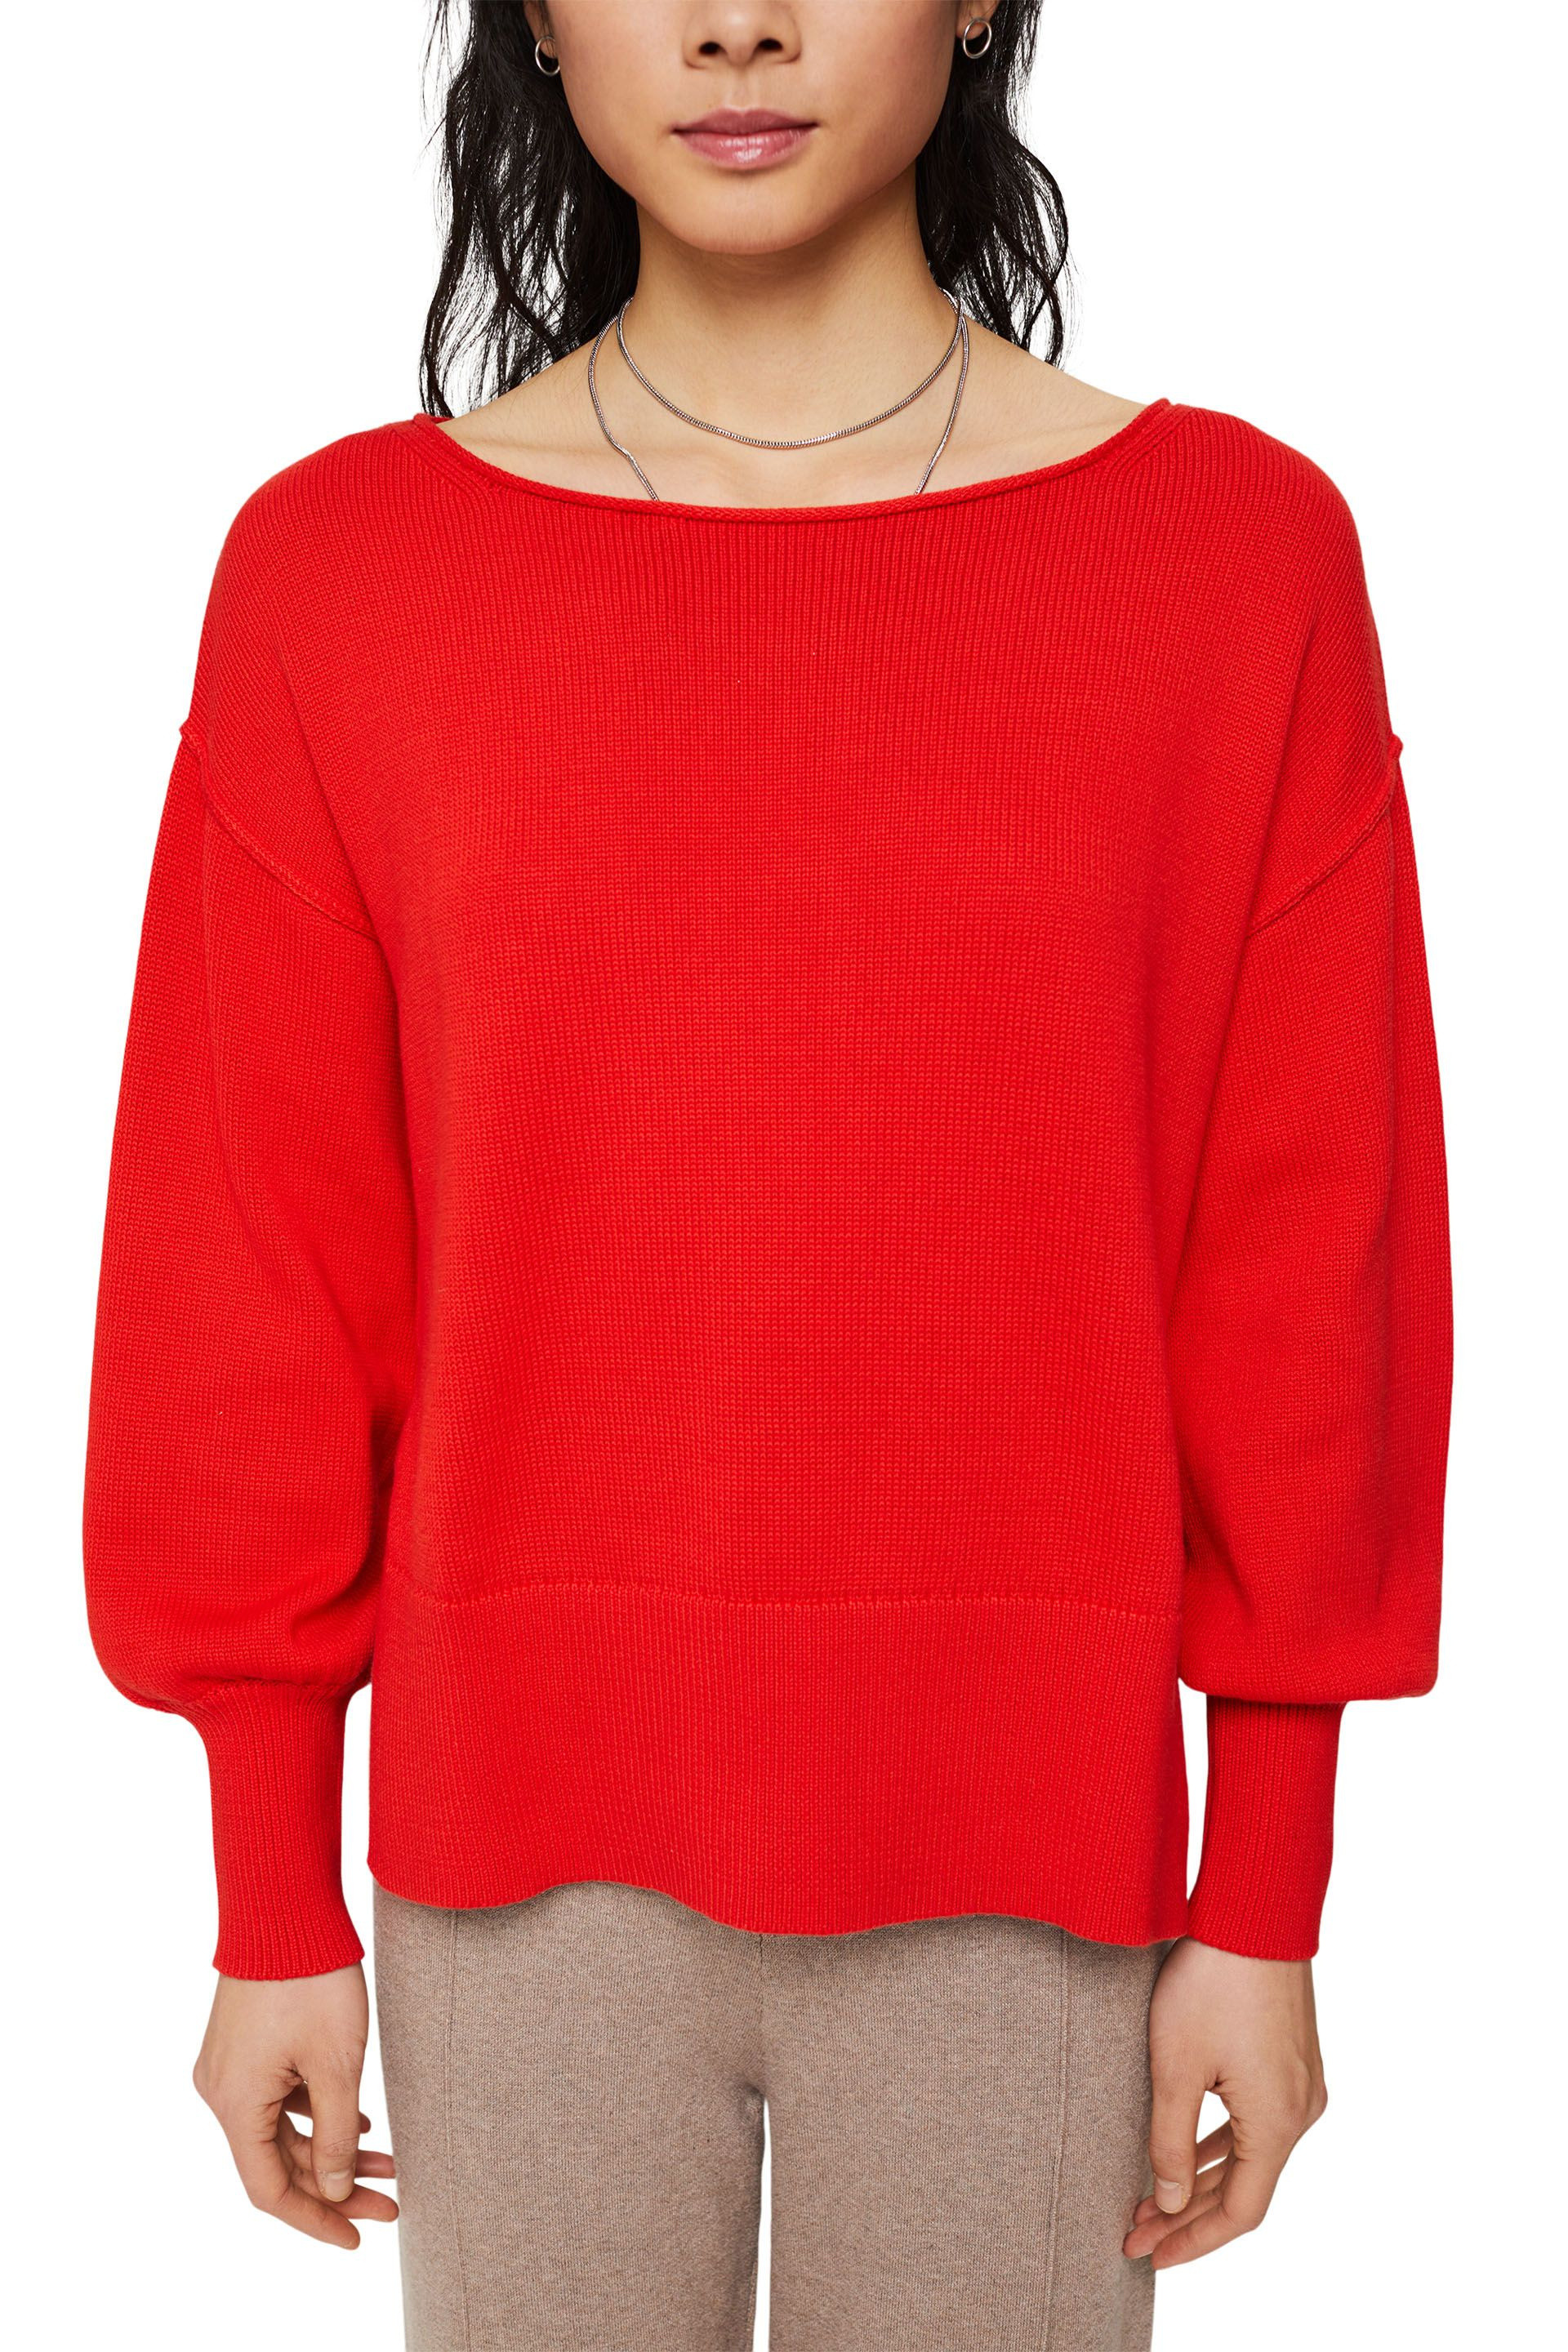 Knitted pullover with slits, Red, large image number 1